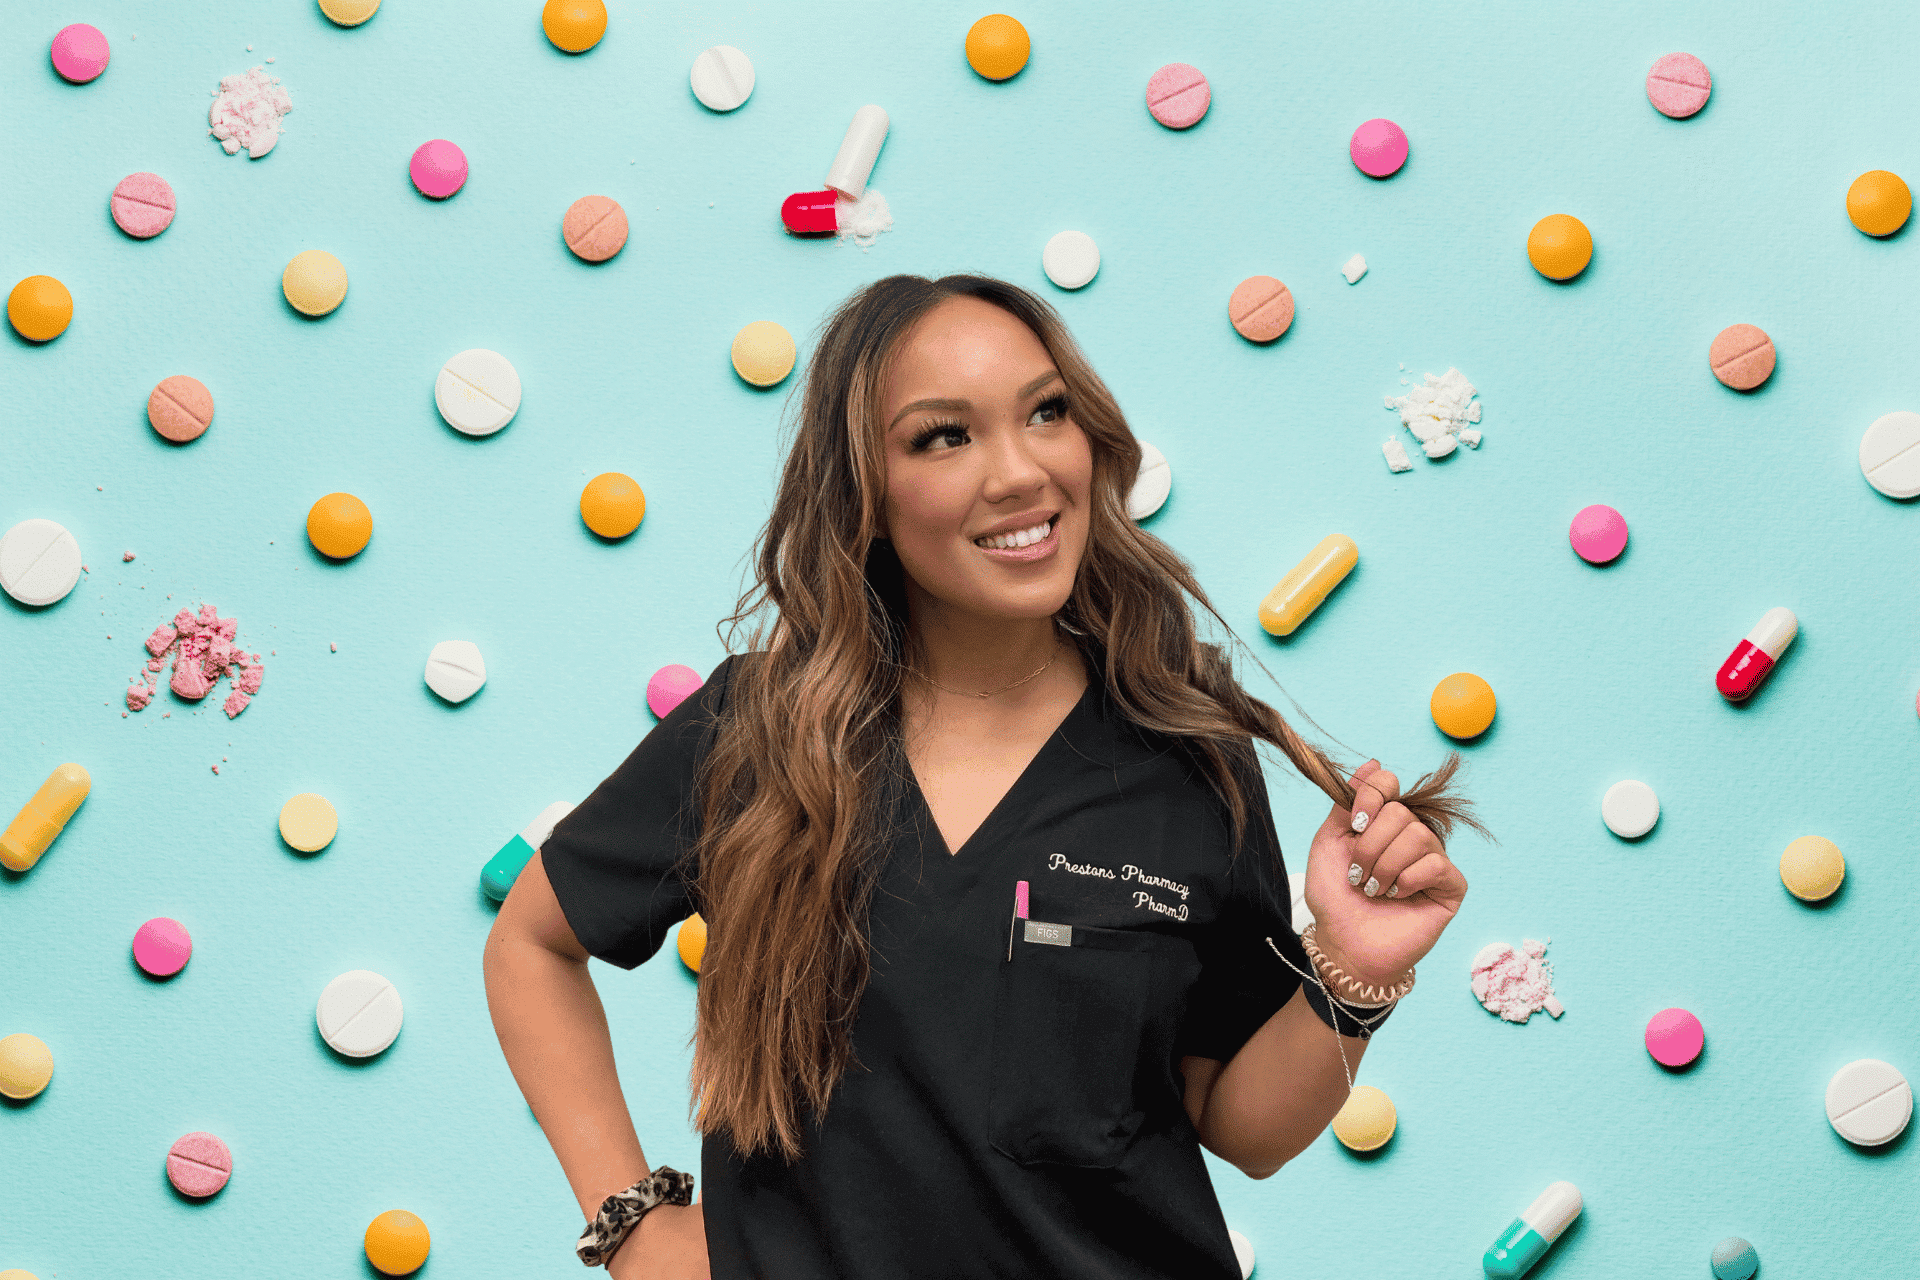 Tips From Tori: For New Pharmacy Business Owners